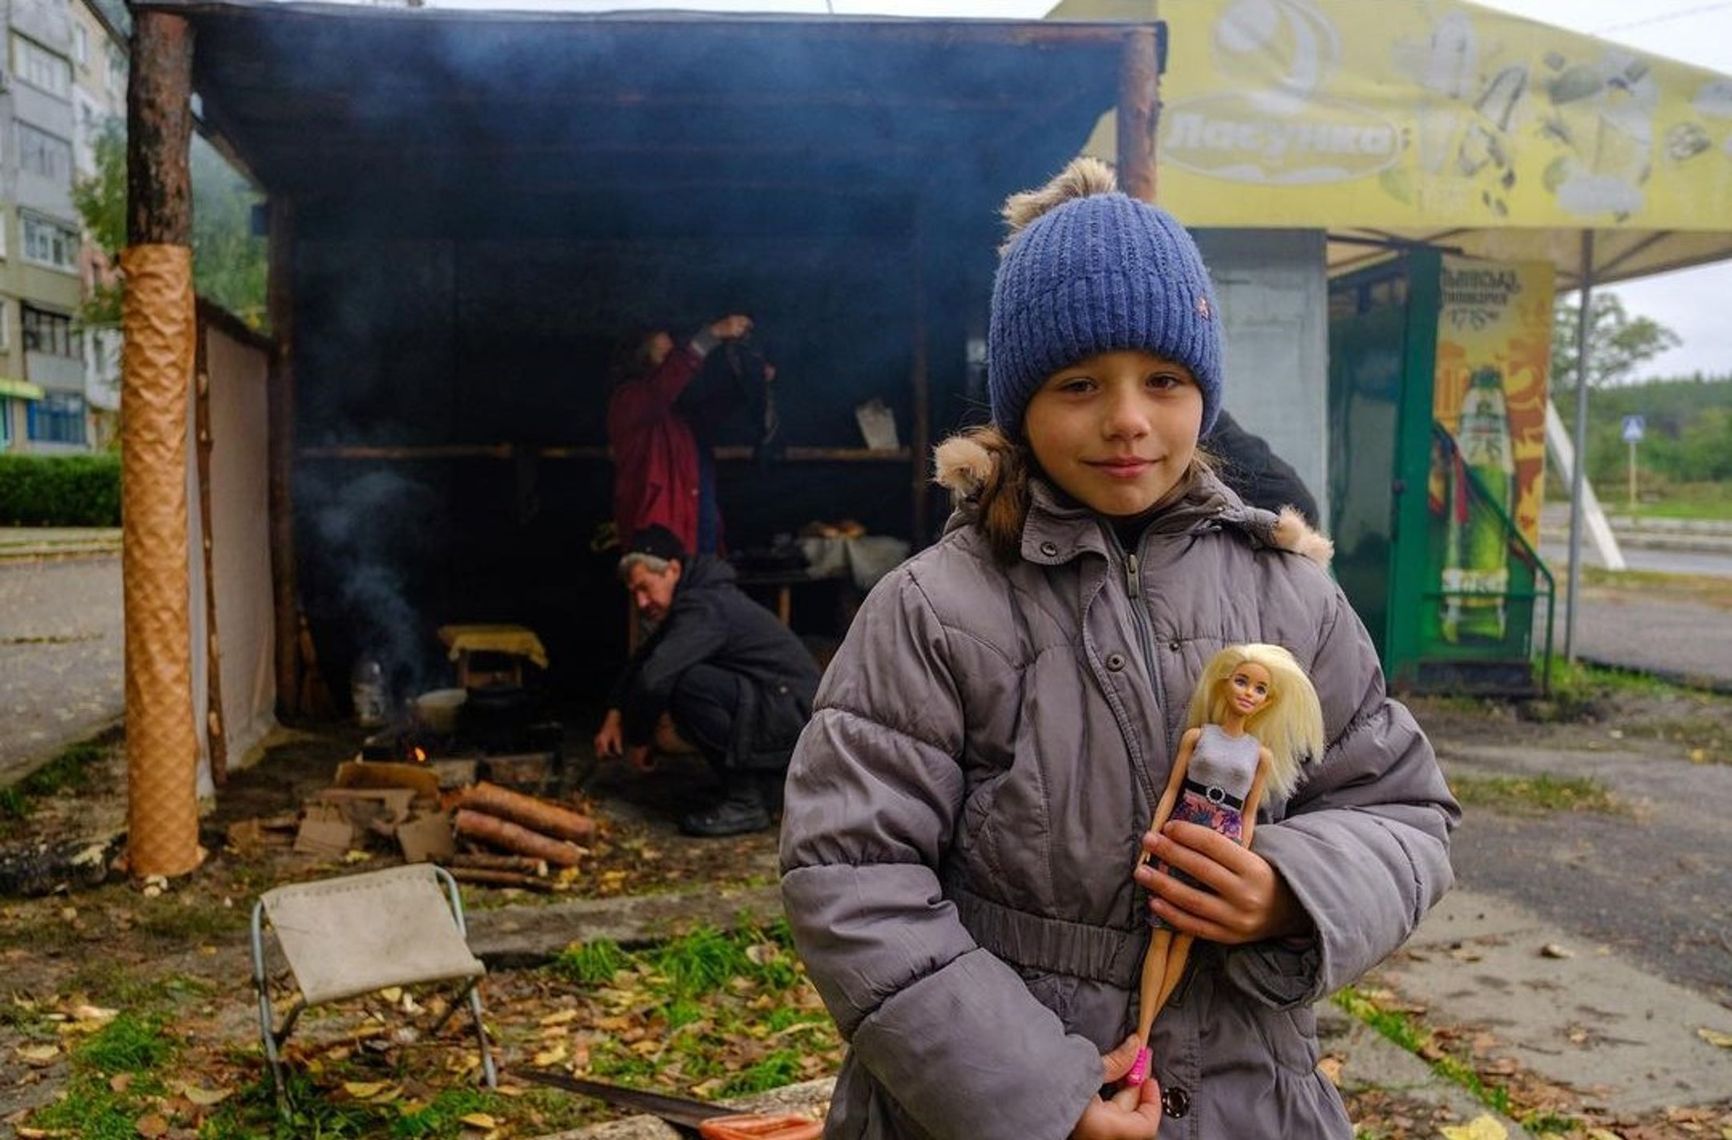 Anya, a young girl, is preparing for evacuation to Kharkiv with her doll, Angelina